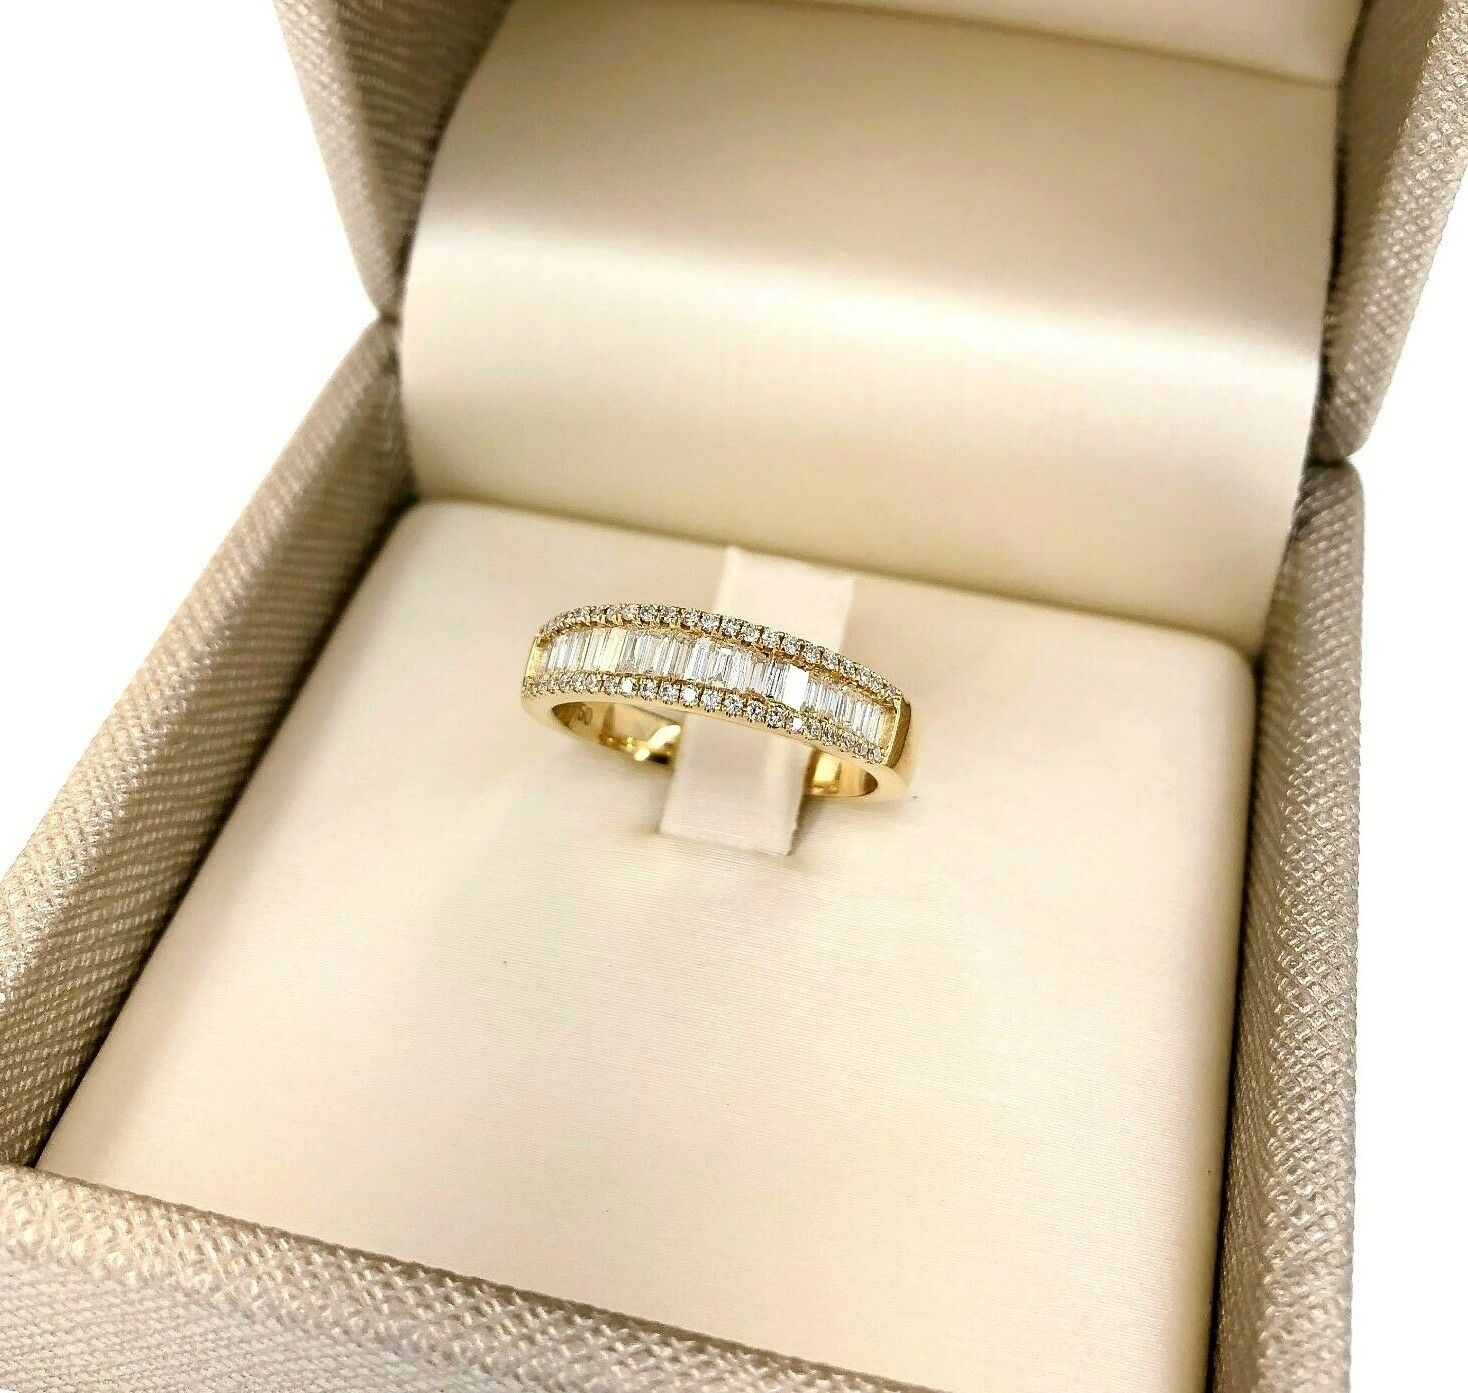 0.50 Carats Round & Baguette Diamond Anniversary Ring Wedding Band Yellow Gold